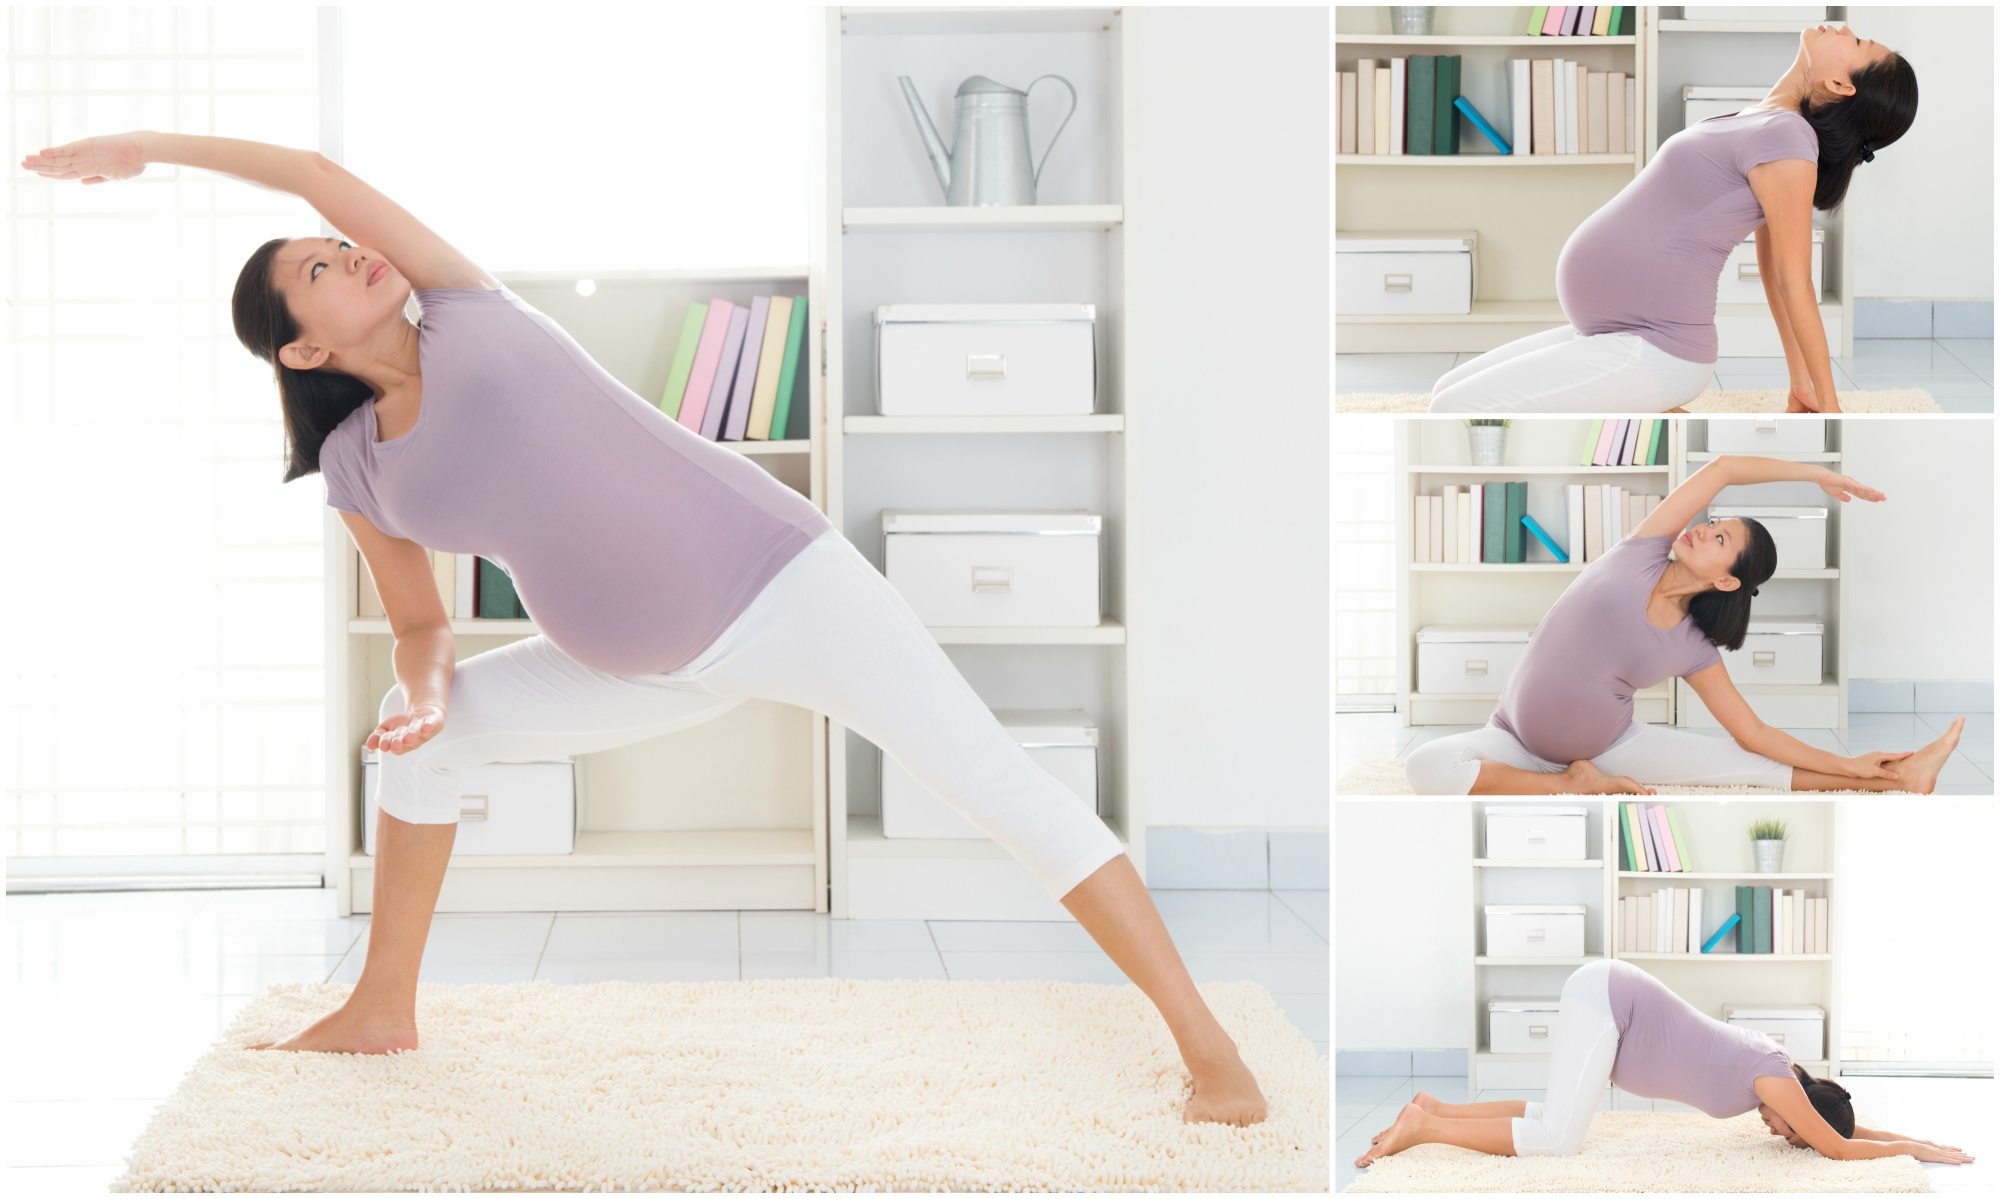 Exercise During Pregnancy - Axia Women's Health